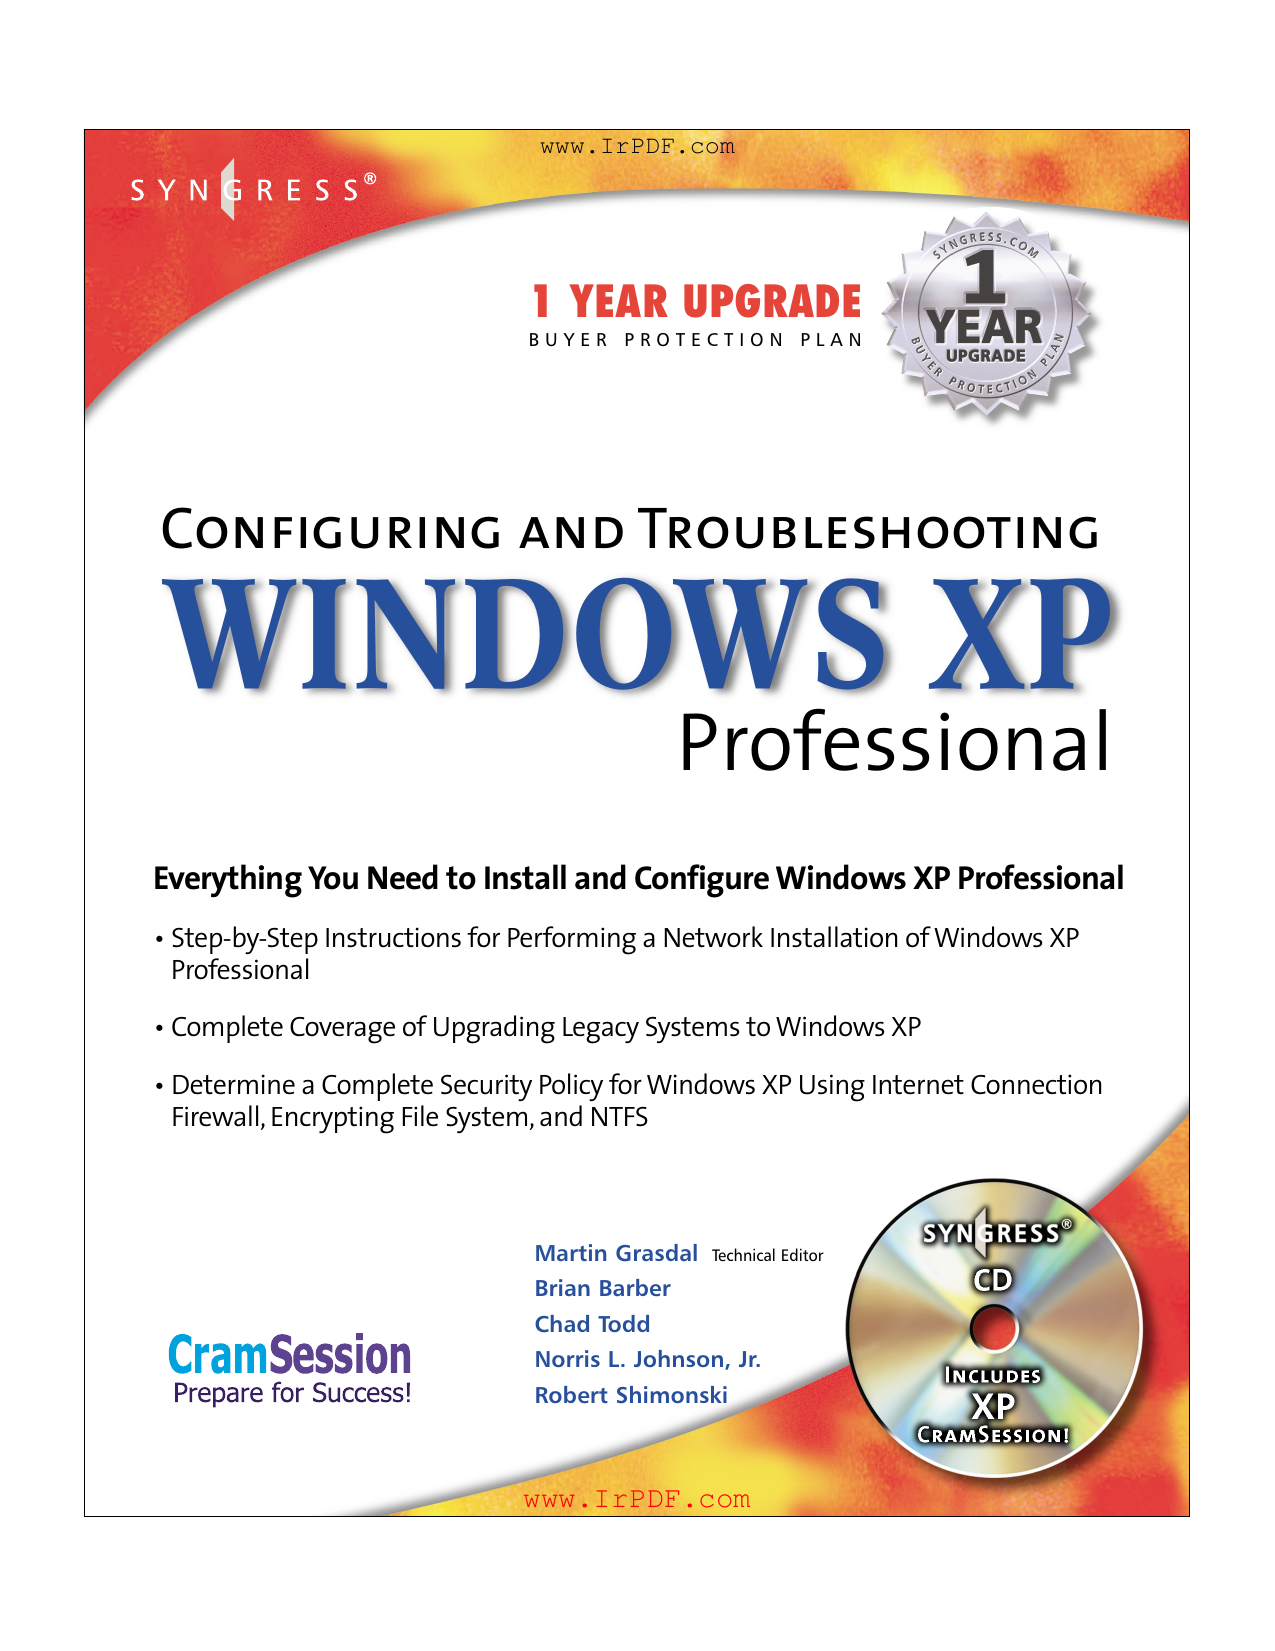 winfax pro 10.4 can install with 64 bit